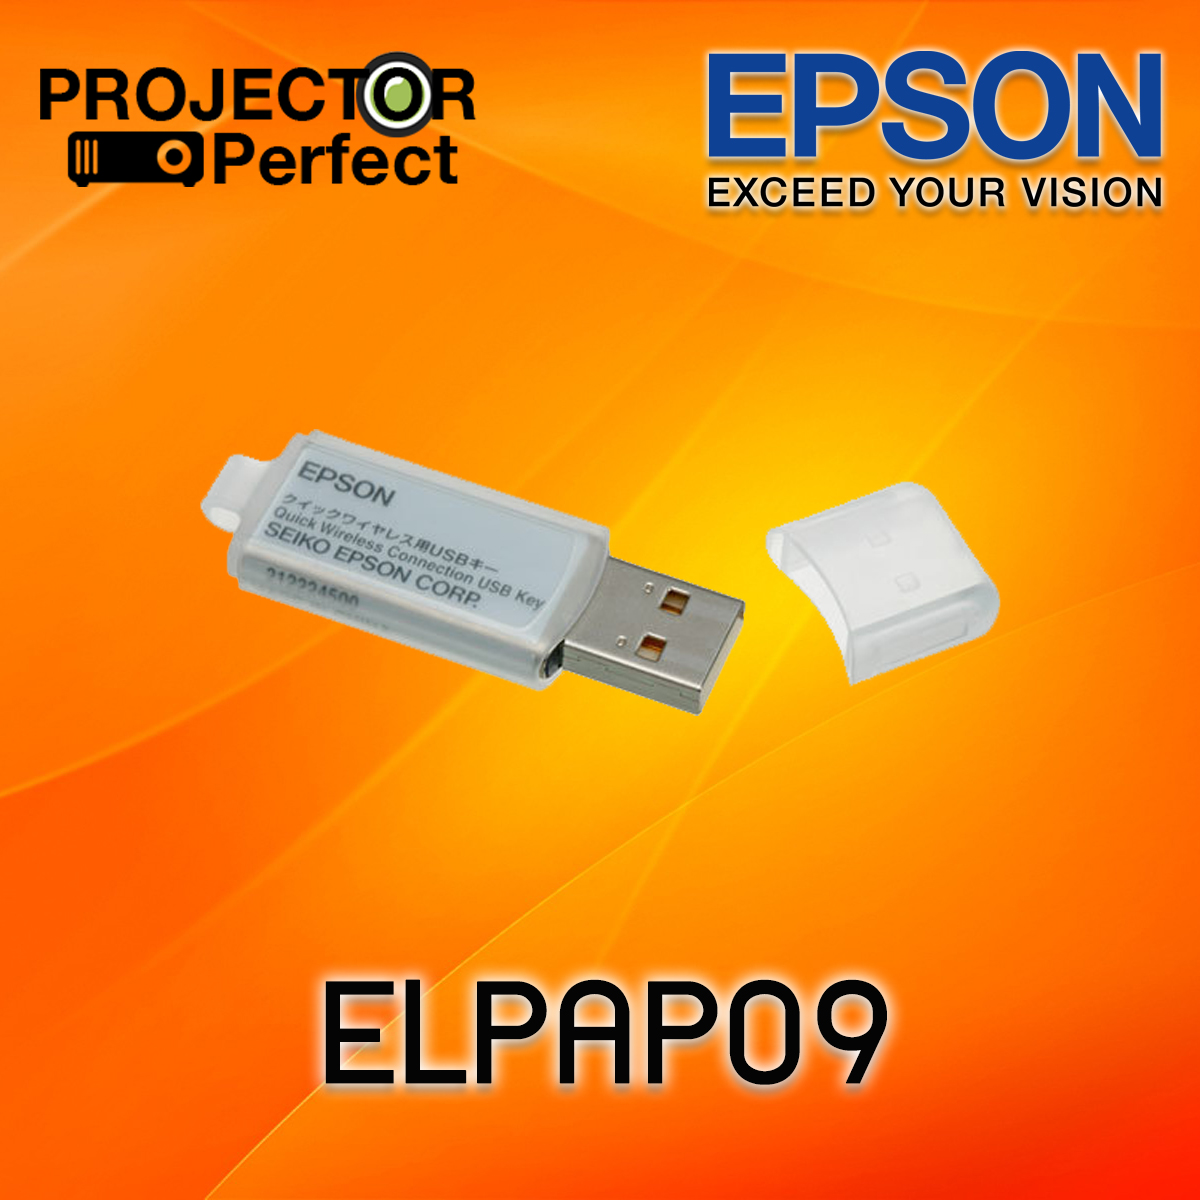 Epson Quick Wireless Connection USB ELPAP09 | Lazada.co.th